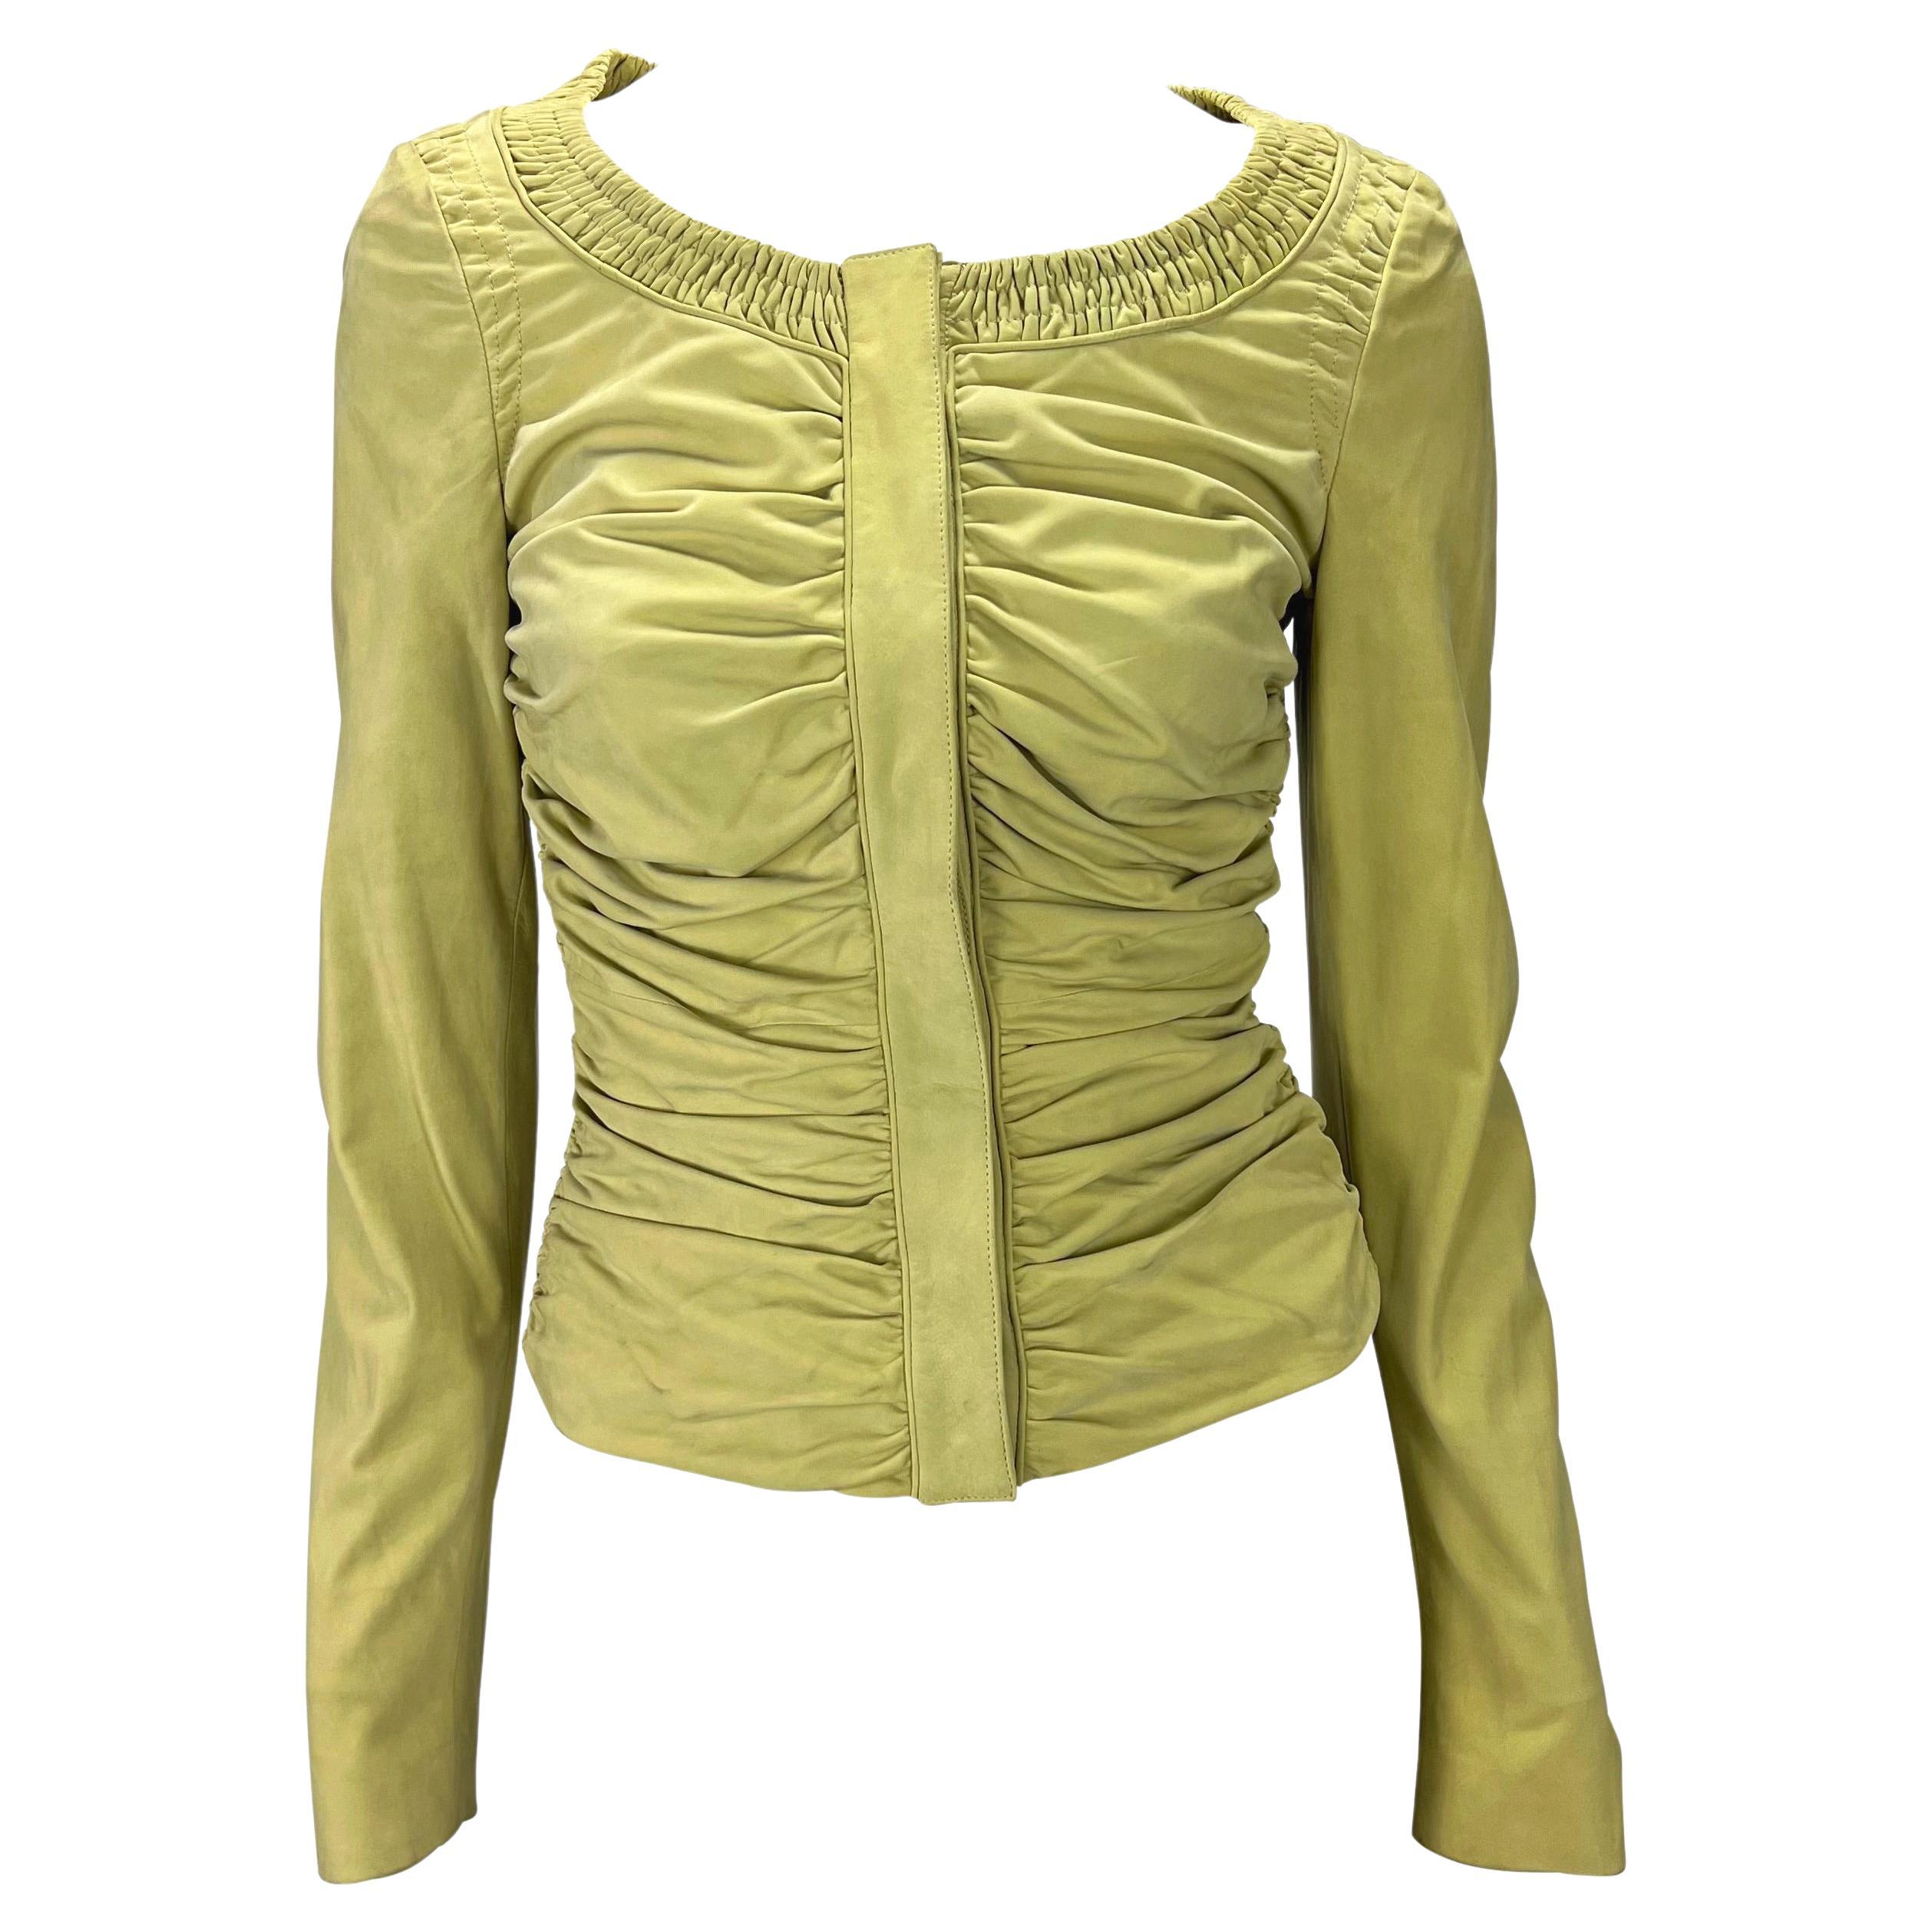 S/S 2003 Gucci by Tom Ford Ruched Suede Leather Jacket Top